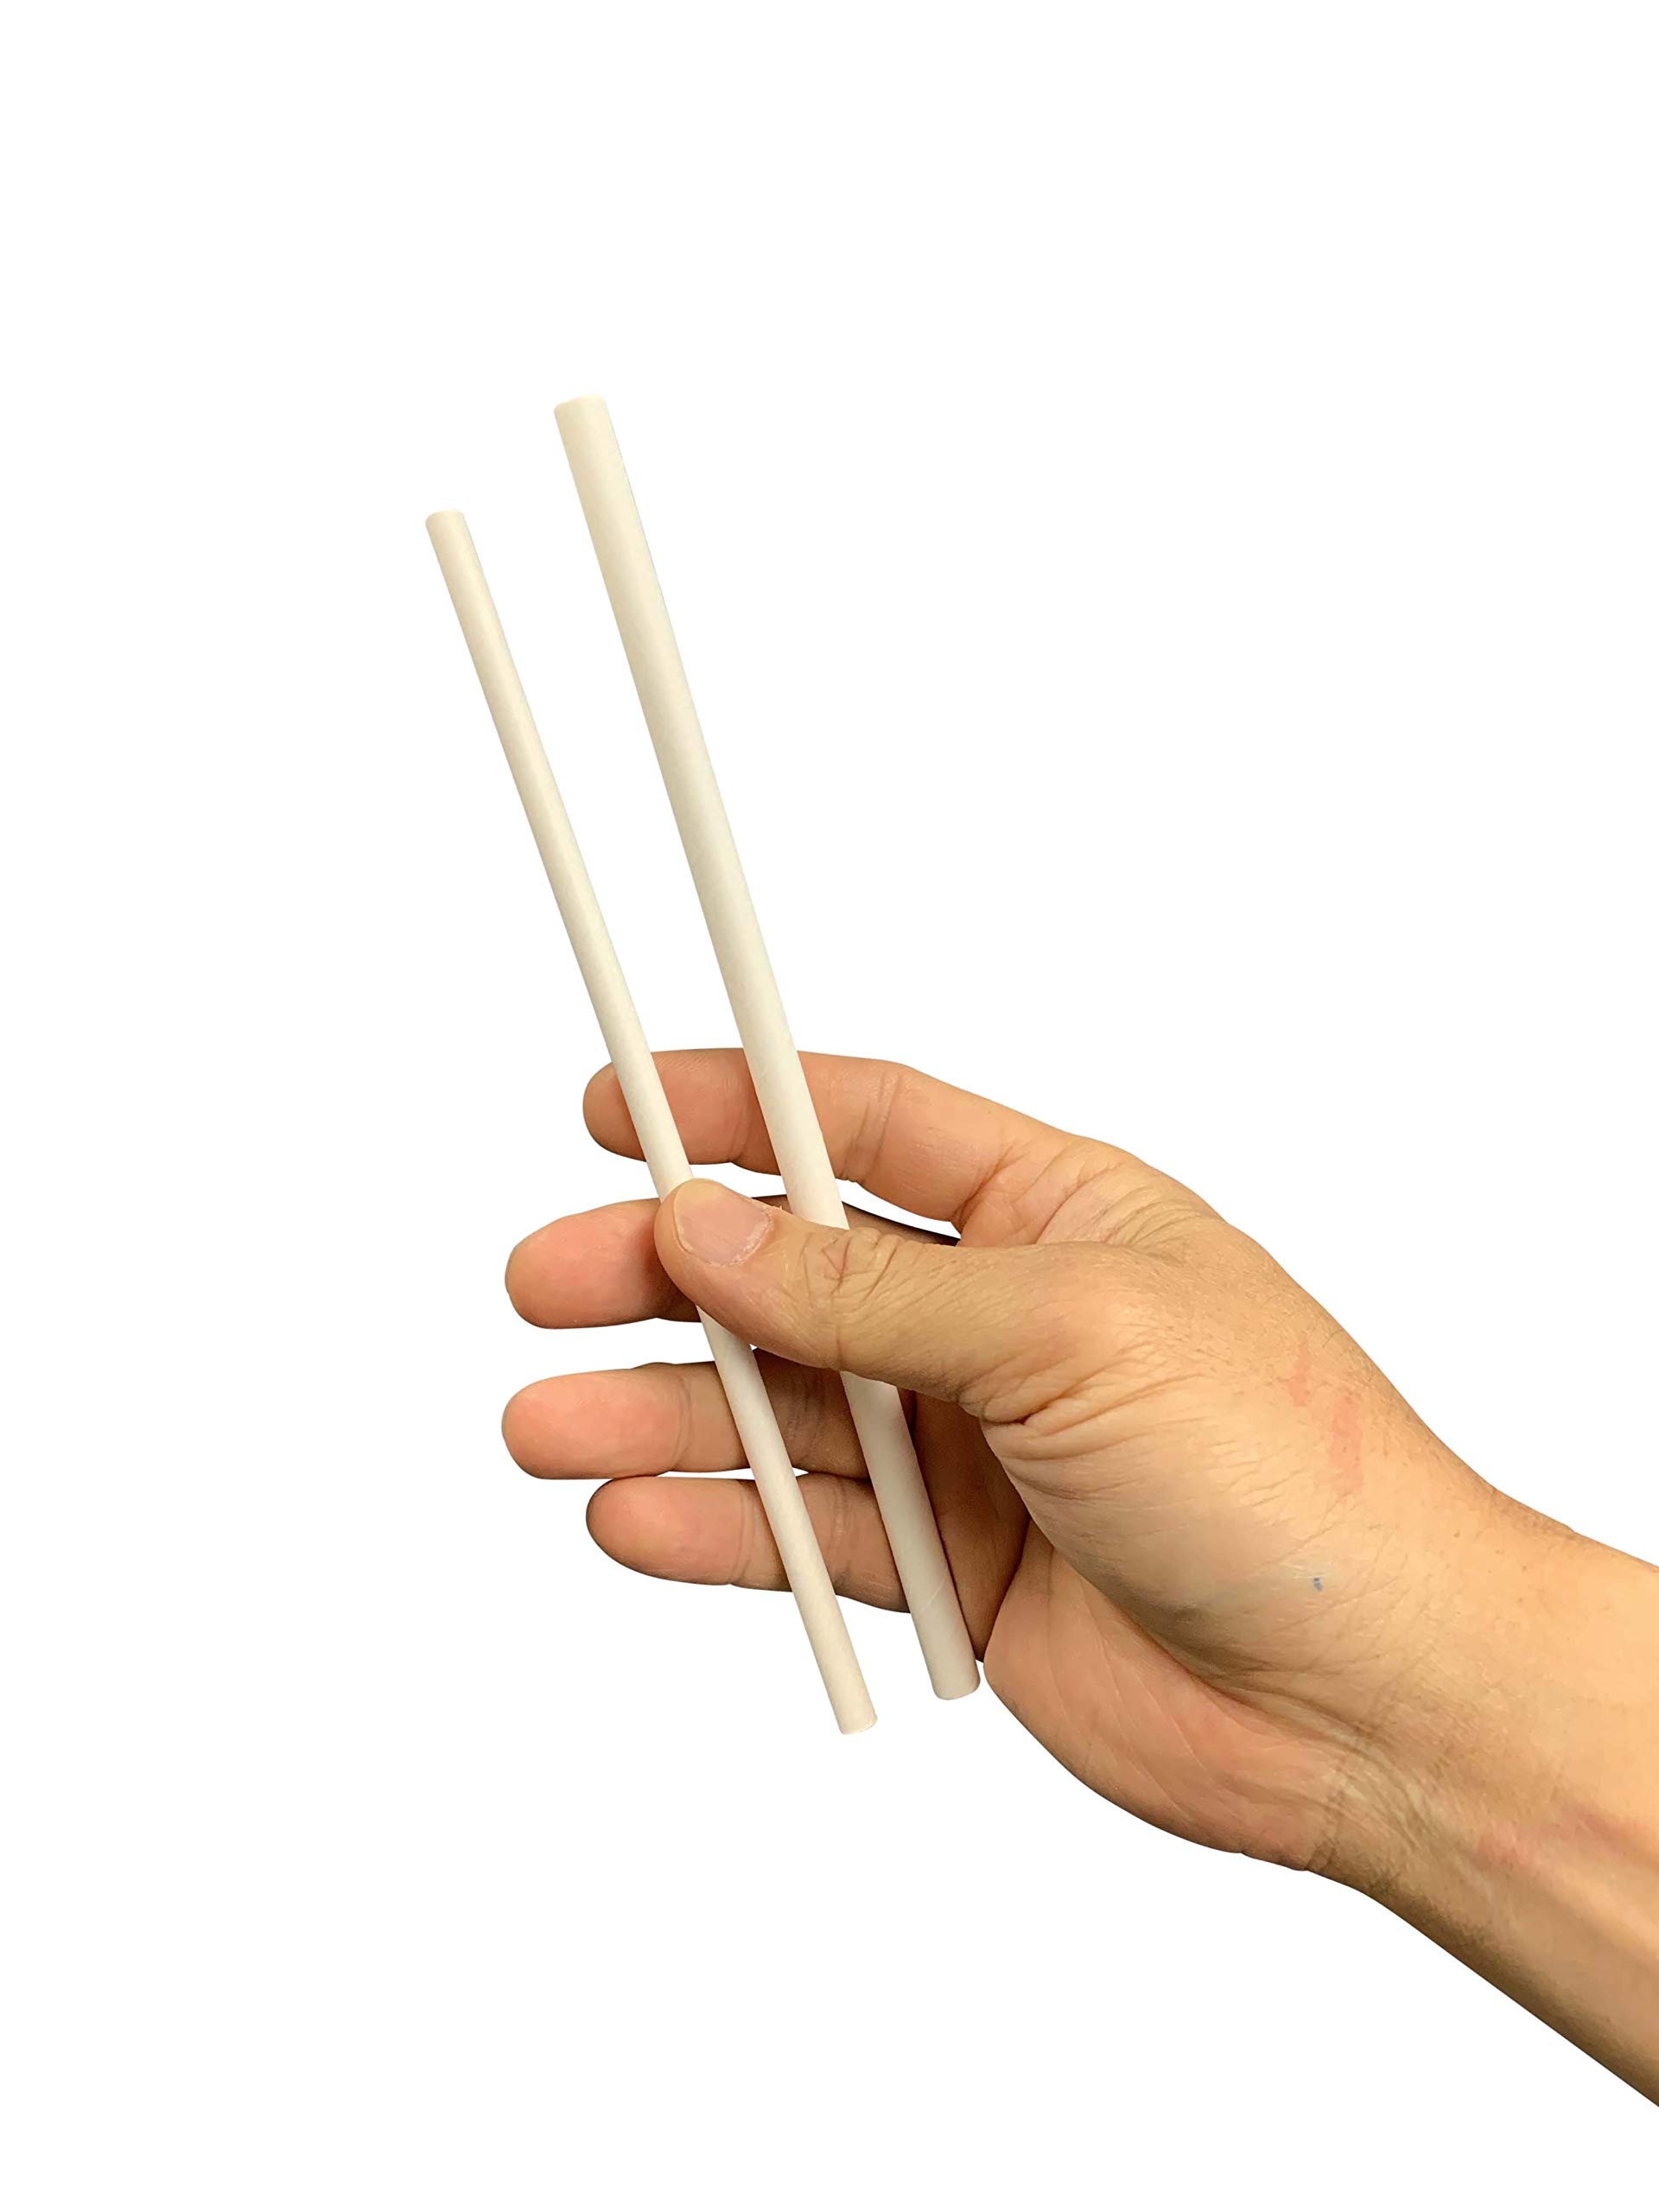 Kingseal Disposable Paper Drinking Straws, Unwrapped, WHITE, 7.75 Inch Length x 8mm Diameter, Giant" Size, White, Biodegradable, Earth Friendly, Bulk Pack - 1 Box of 350 Straws